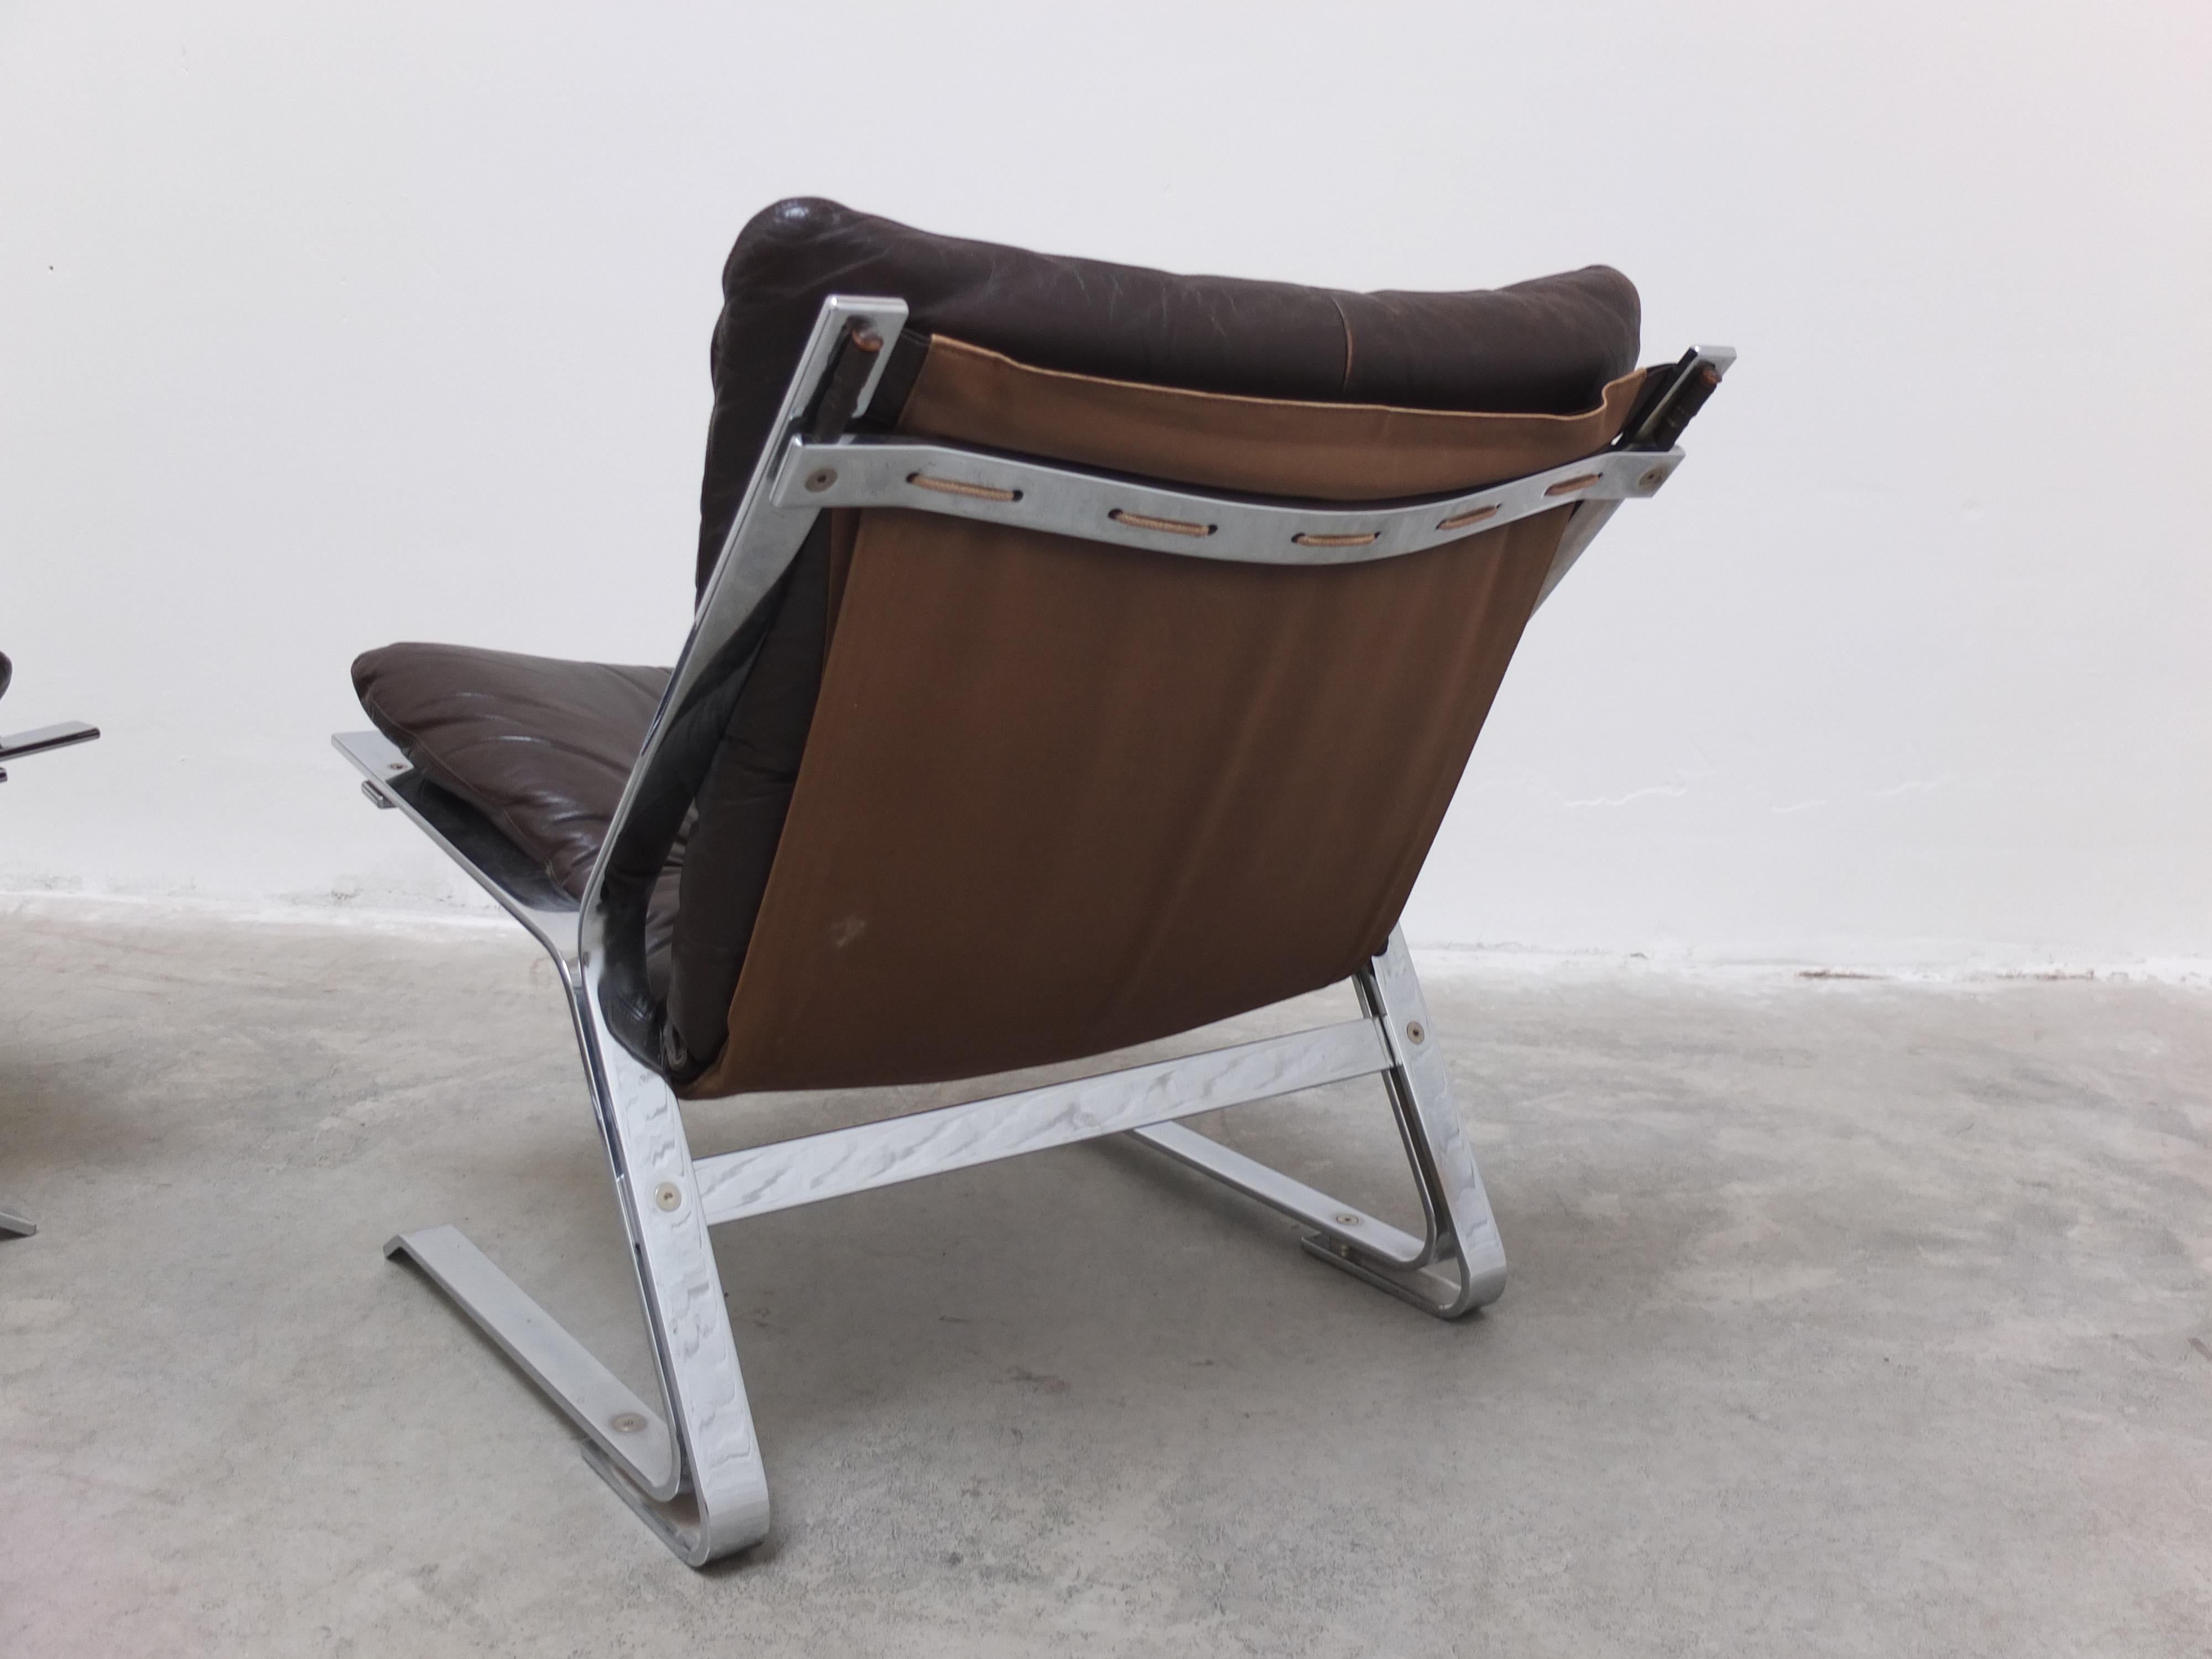 Rare Pair of 'Pirate' Lounge Chairs by Elsa & Nordahl Solheim for Rykken, 1960s For Sale 12